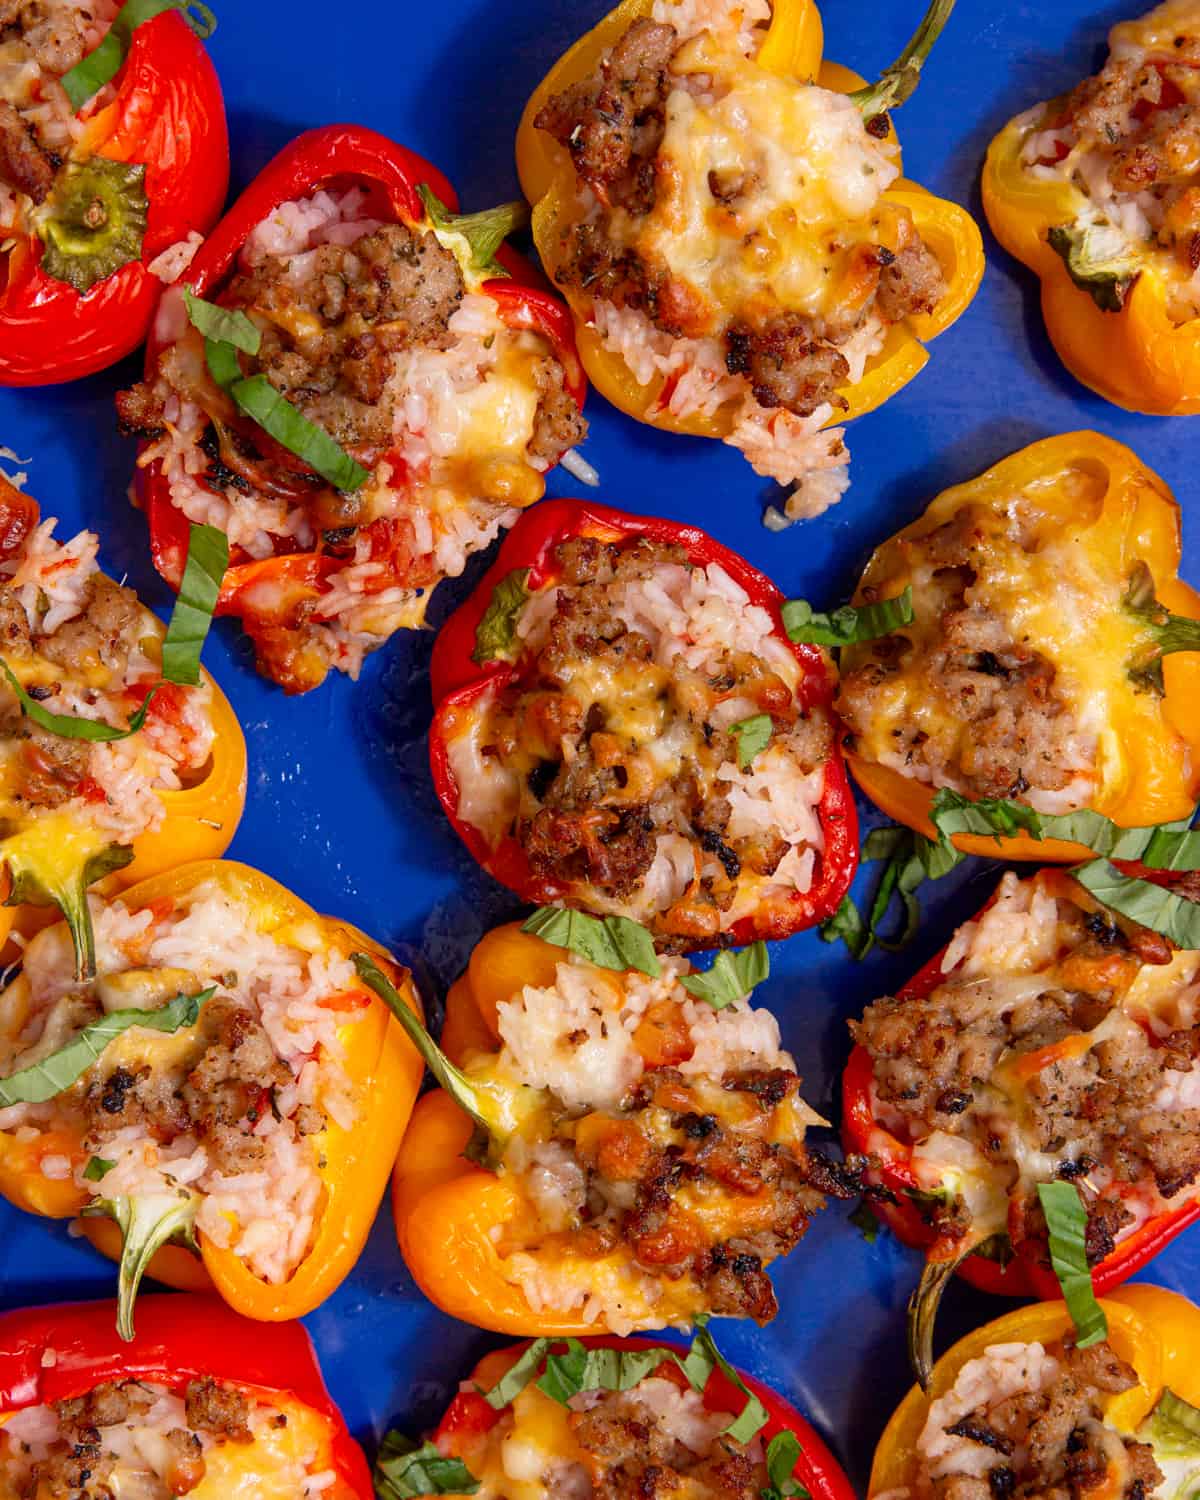 Baked red and yellow pepper halves with rice and sausage filling on a blue tray.